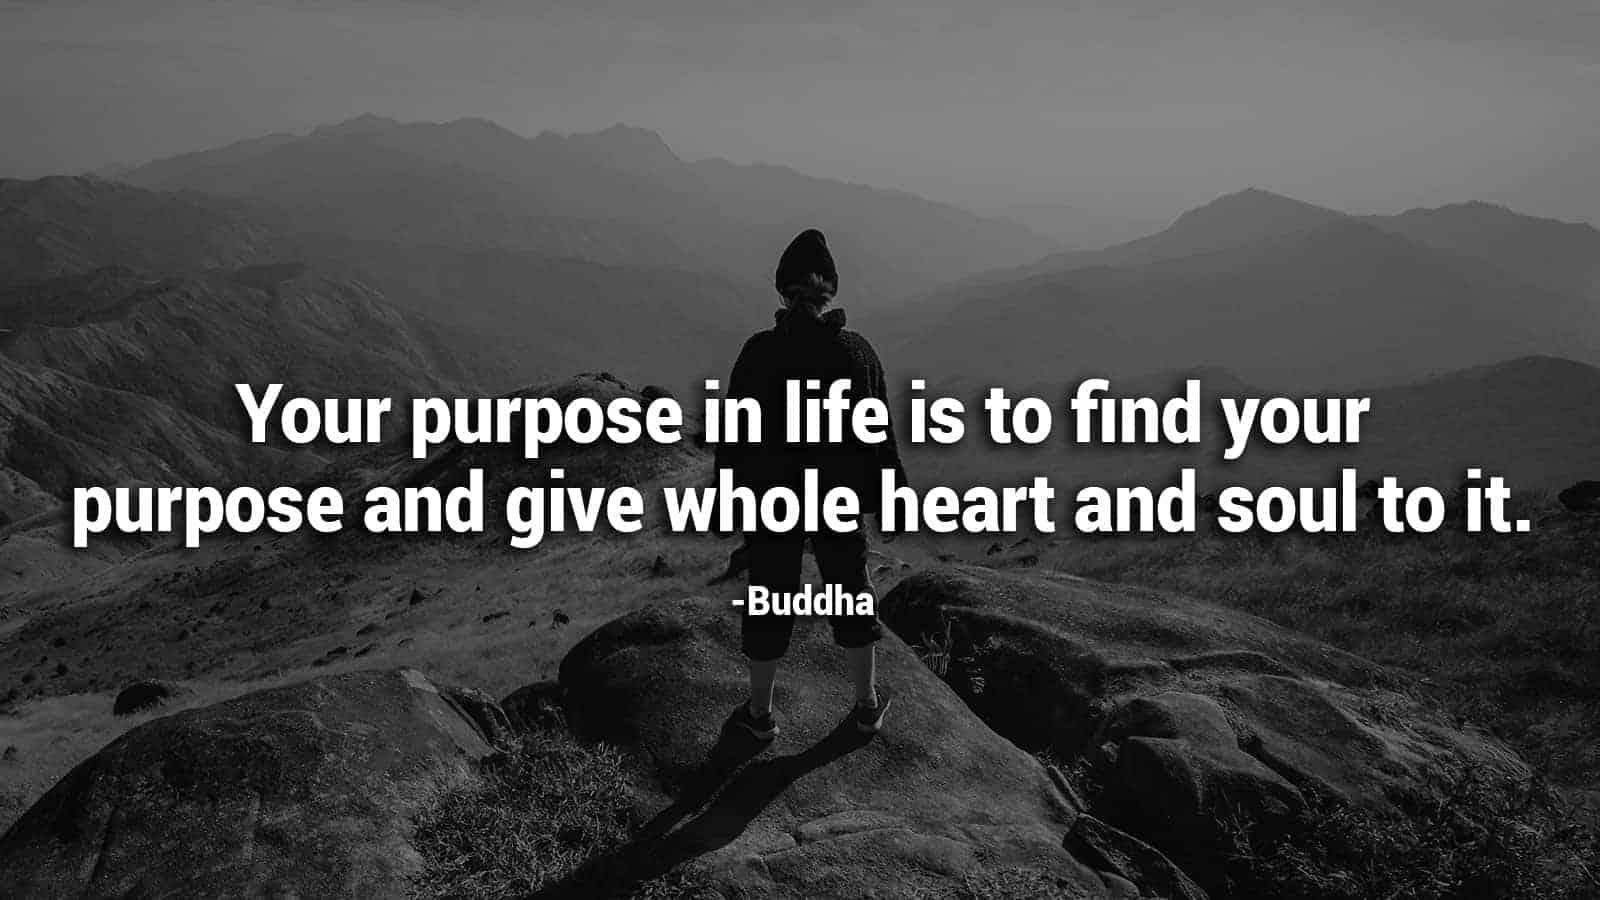 6 Quotes from Buddha That Have the Power to Transform Your Life